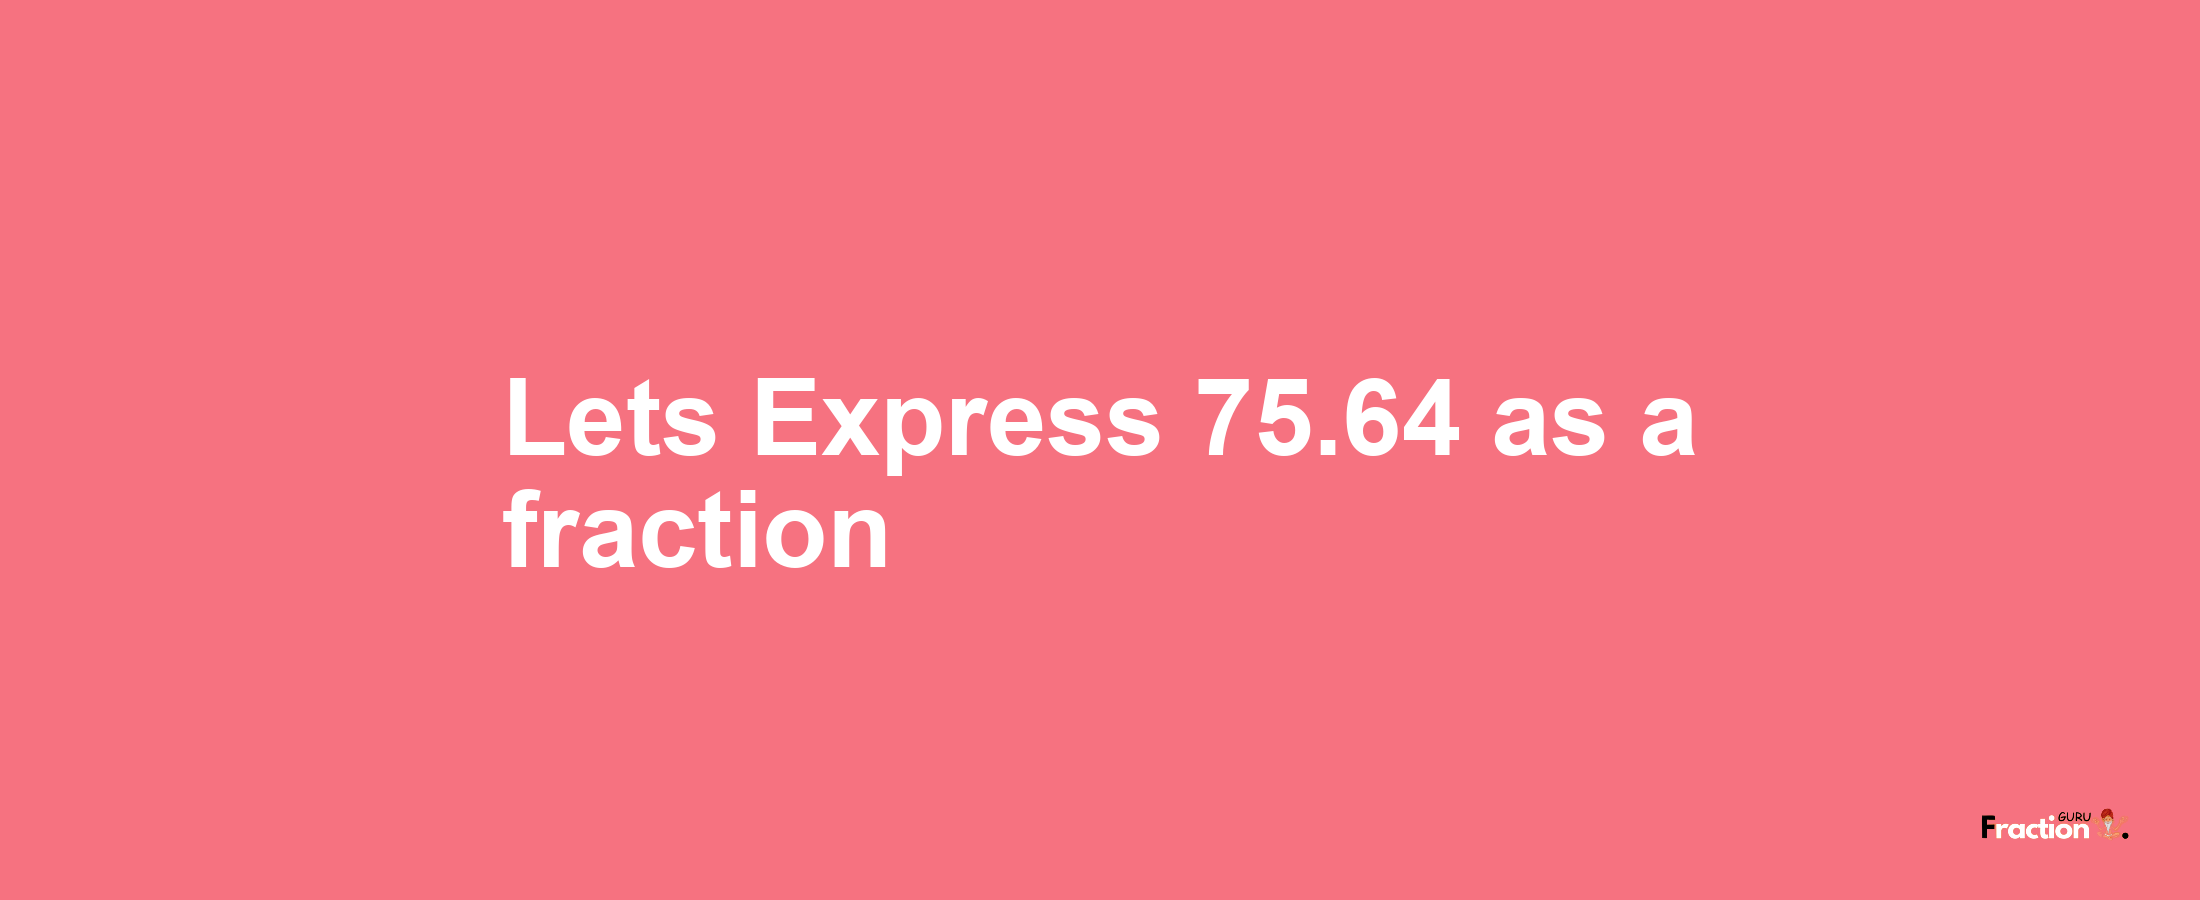 Lets Express 75.64 as afraction